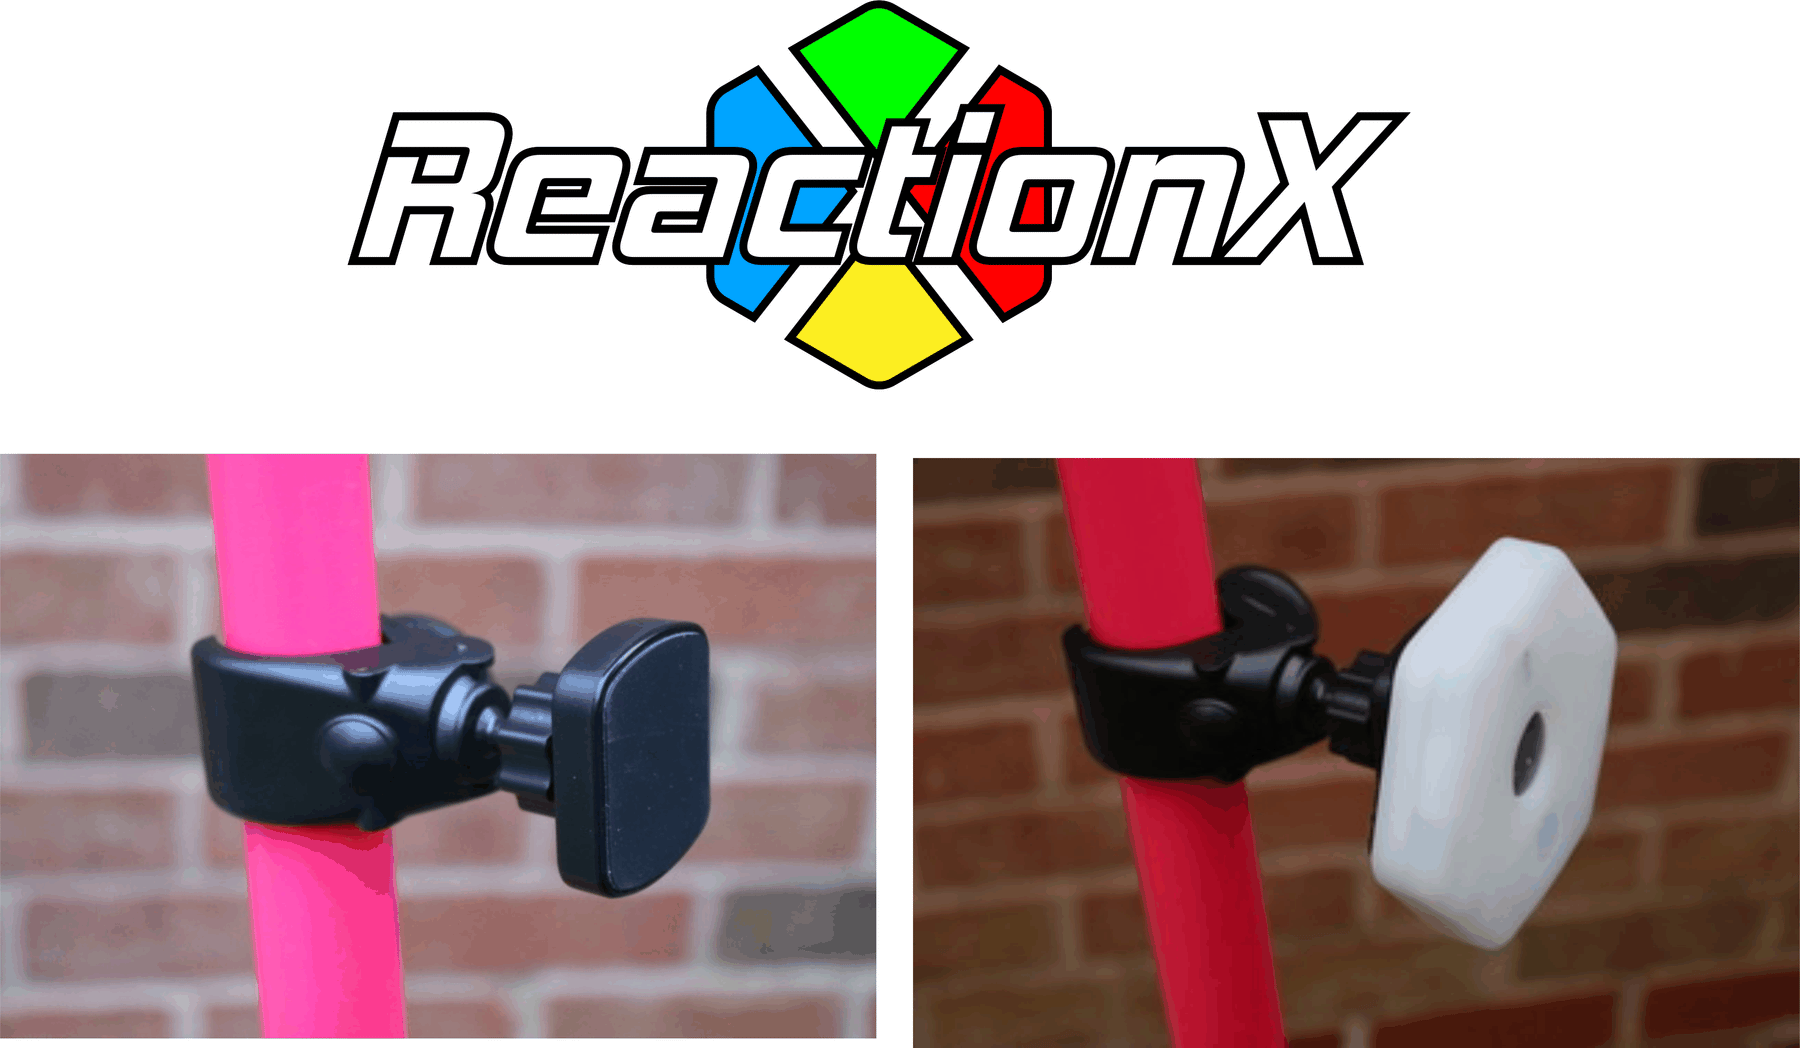 Reaction X - 8 Pole clamps with magnets.